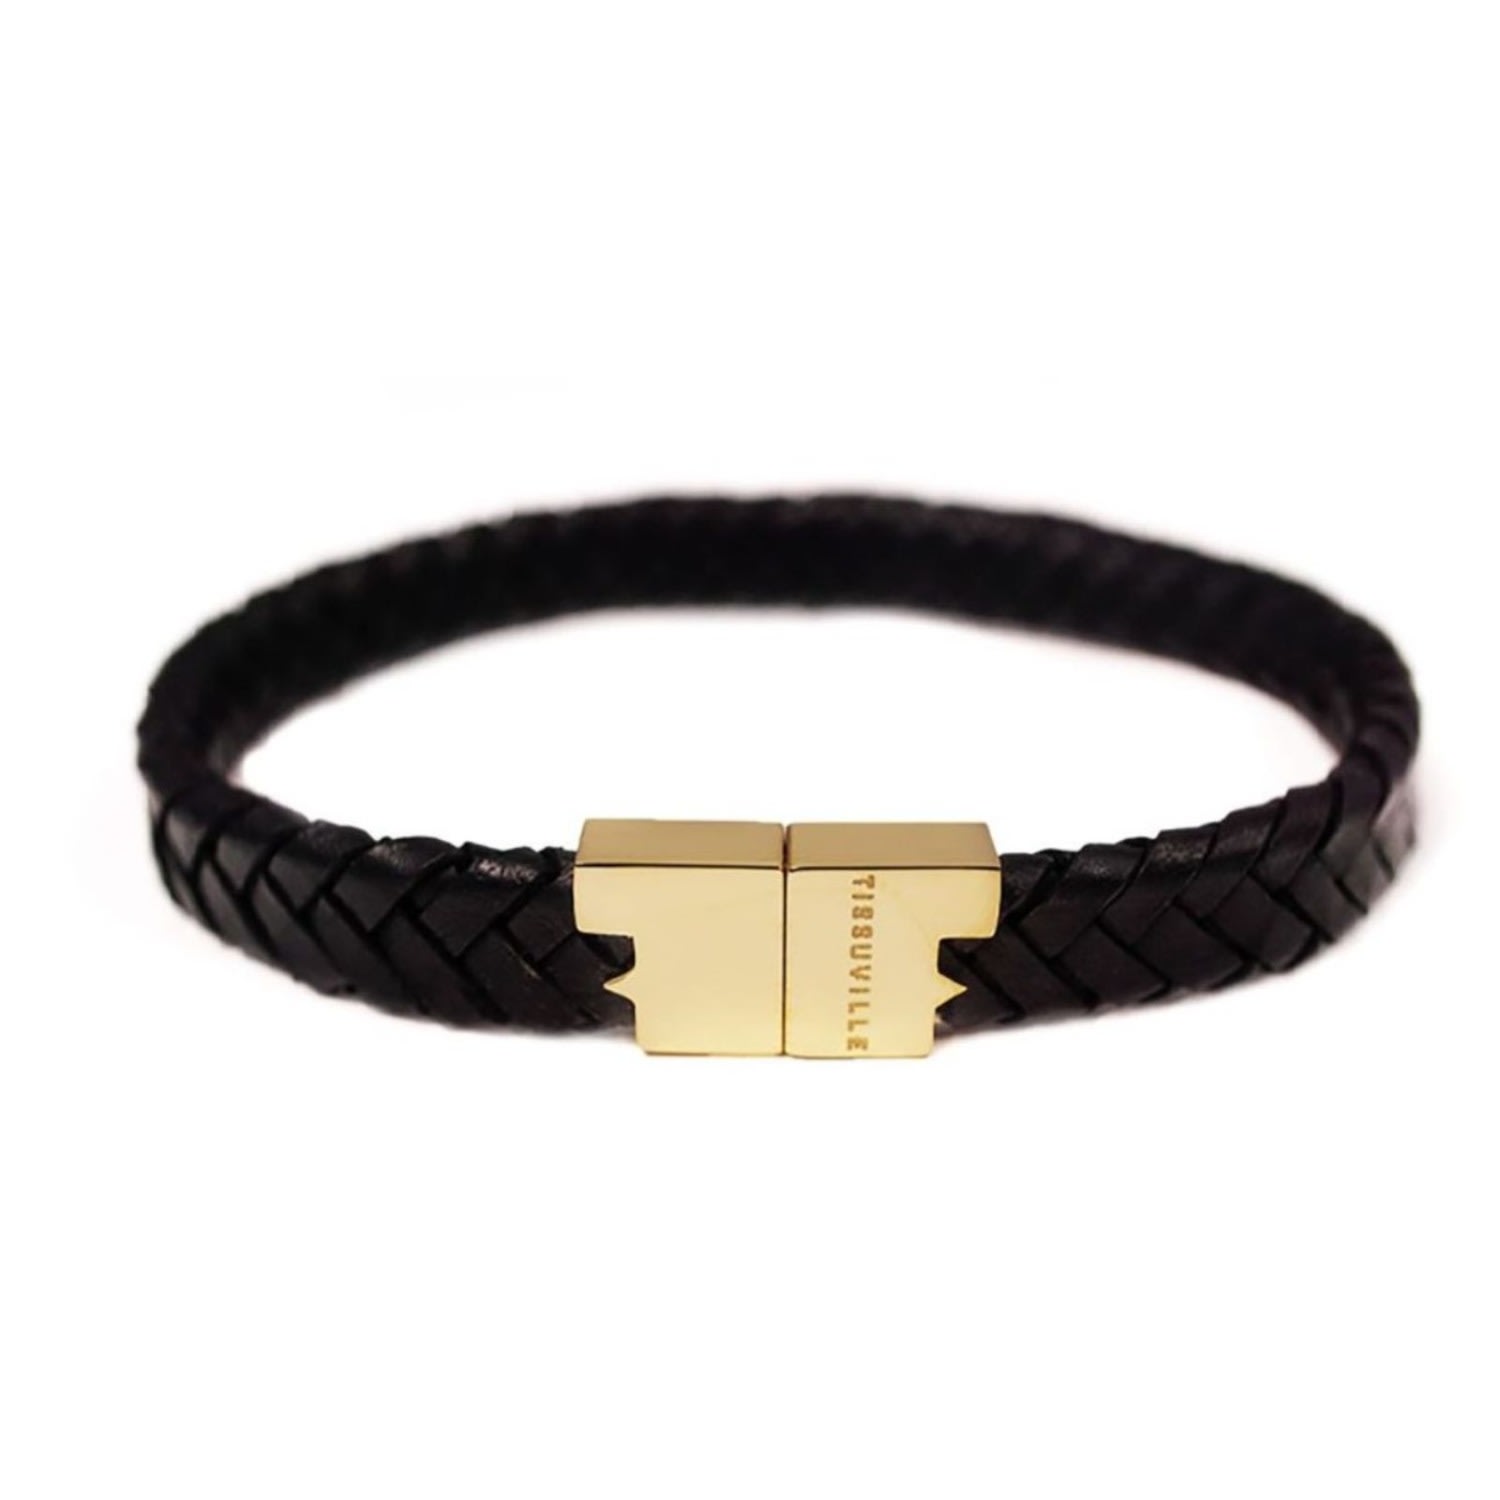 Men's Black Braided Leather Bracelet With Gold-Plated Hardware - Serac Tissuville